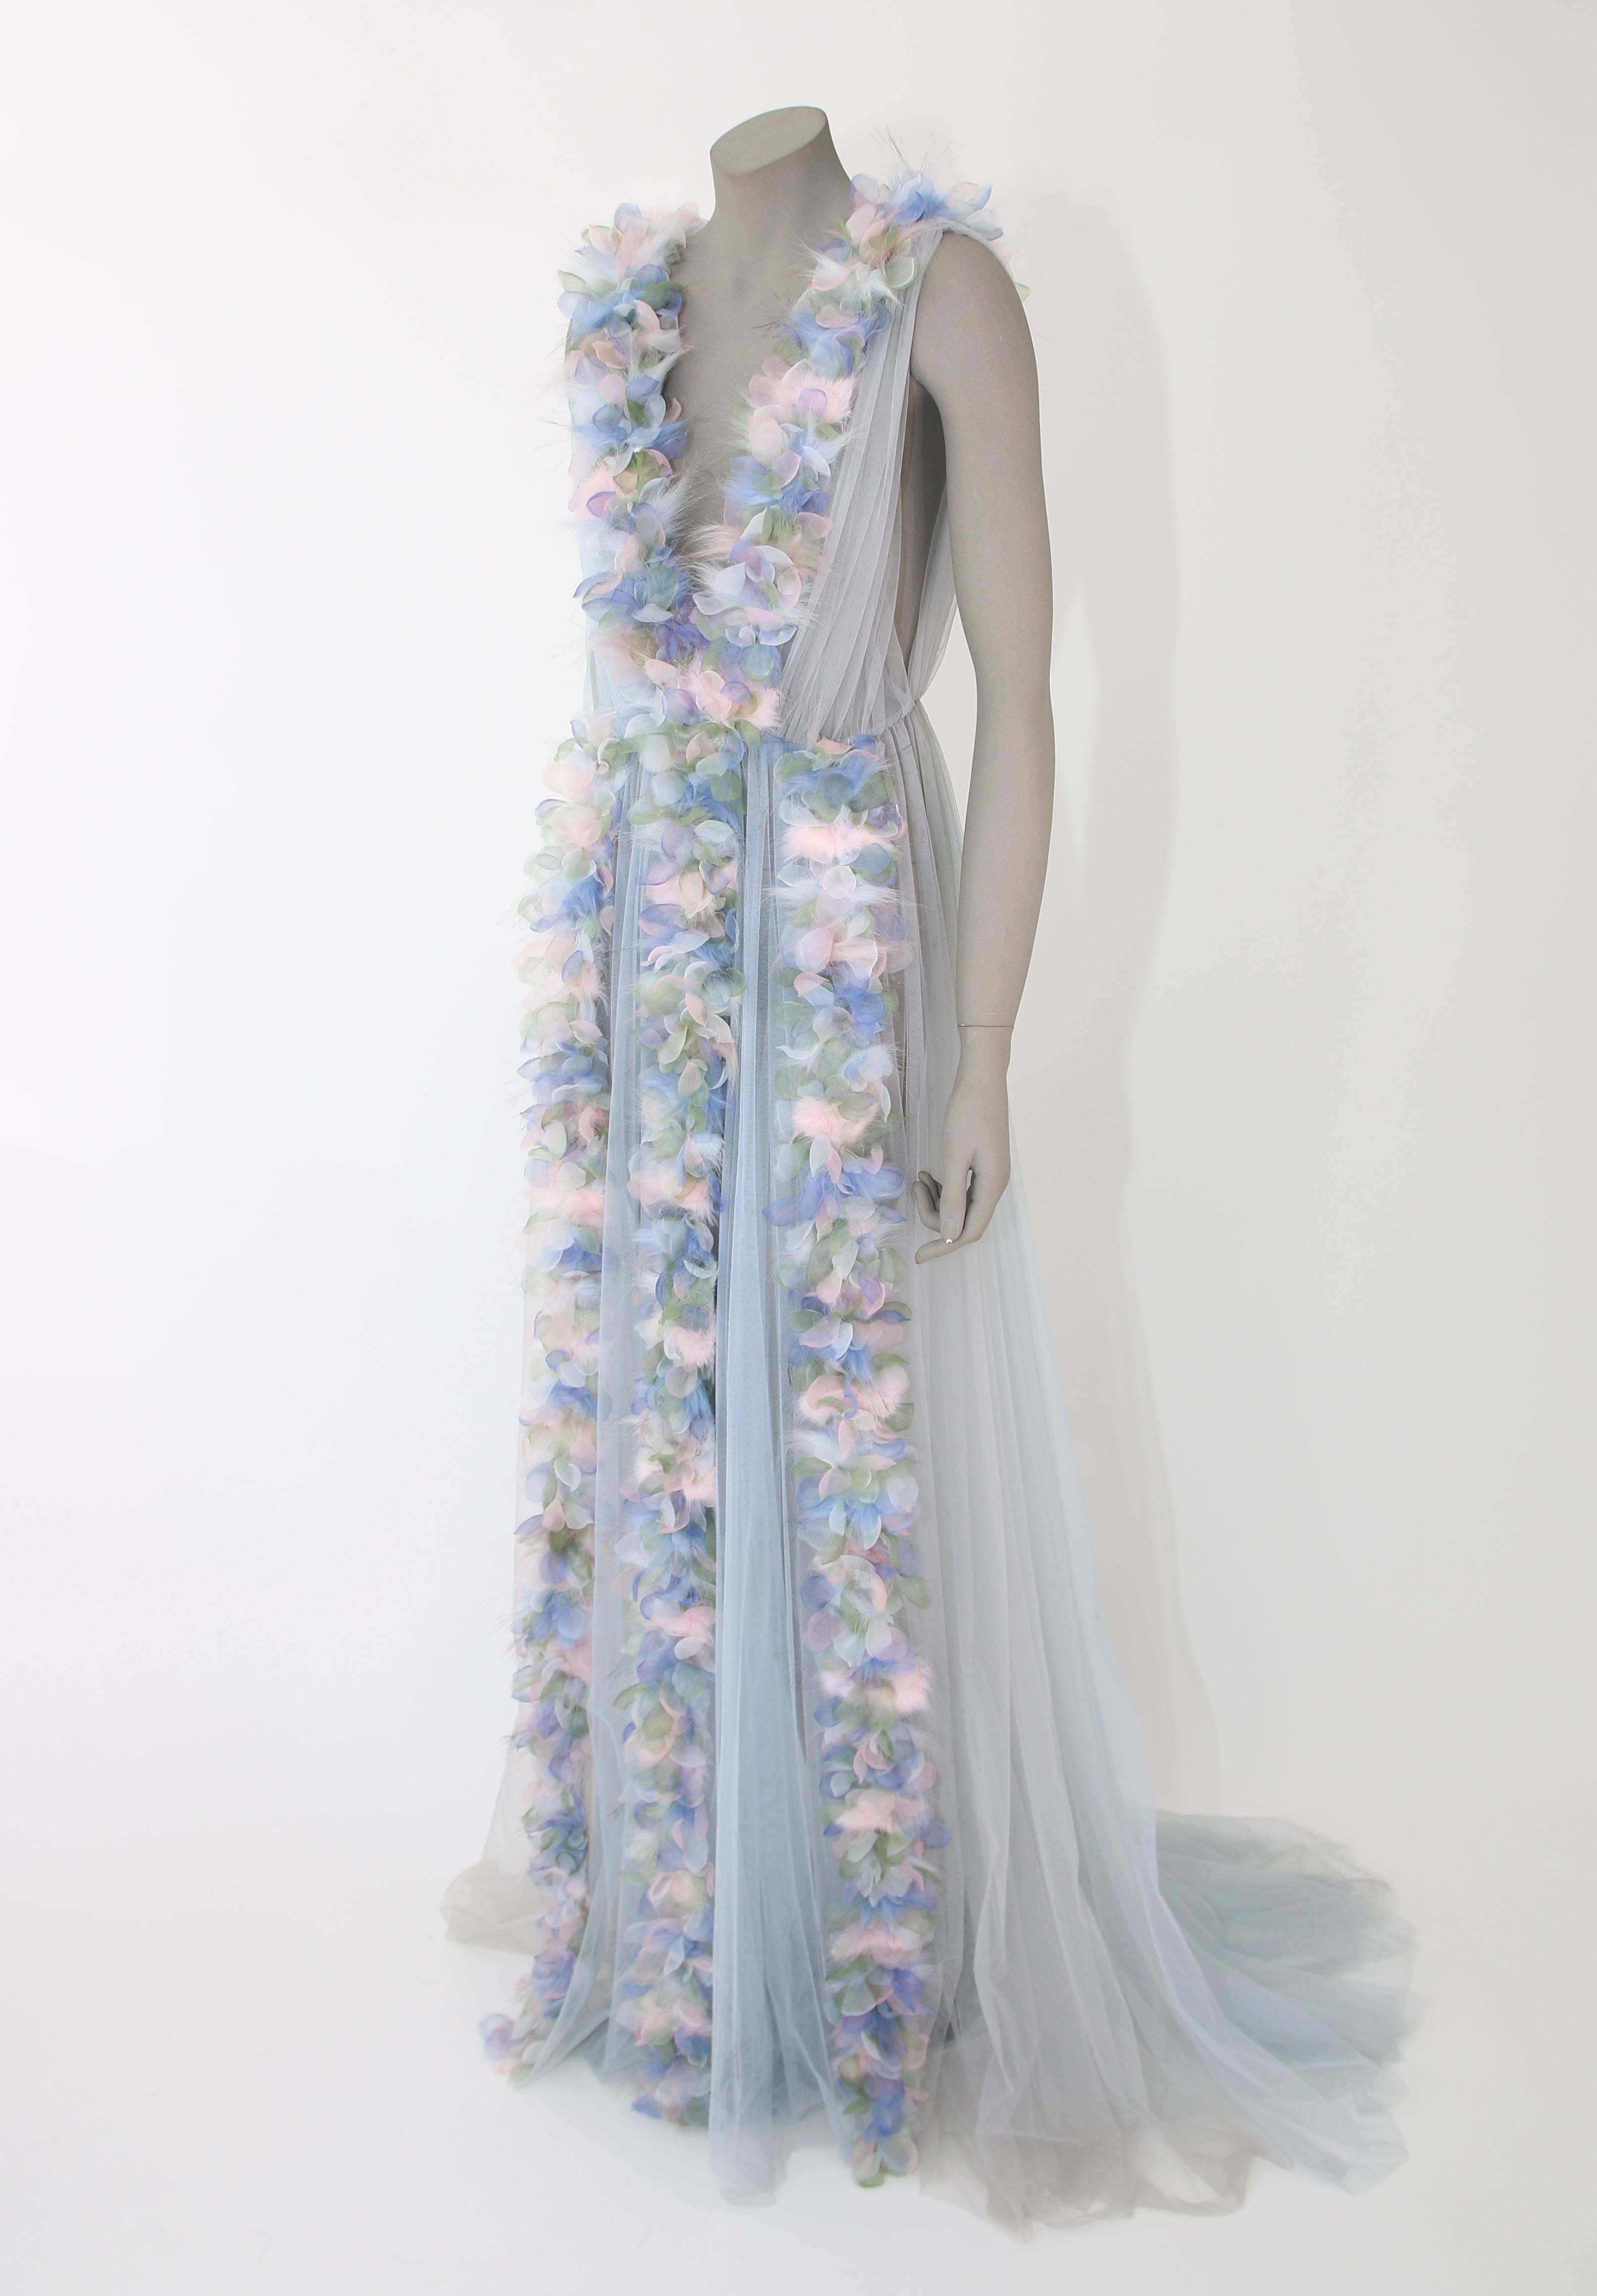 Pelush Baby Blue Tulle Dress Gown With Tridimensional Flowers And Faux Feathers  5